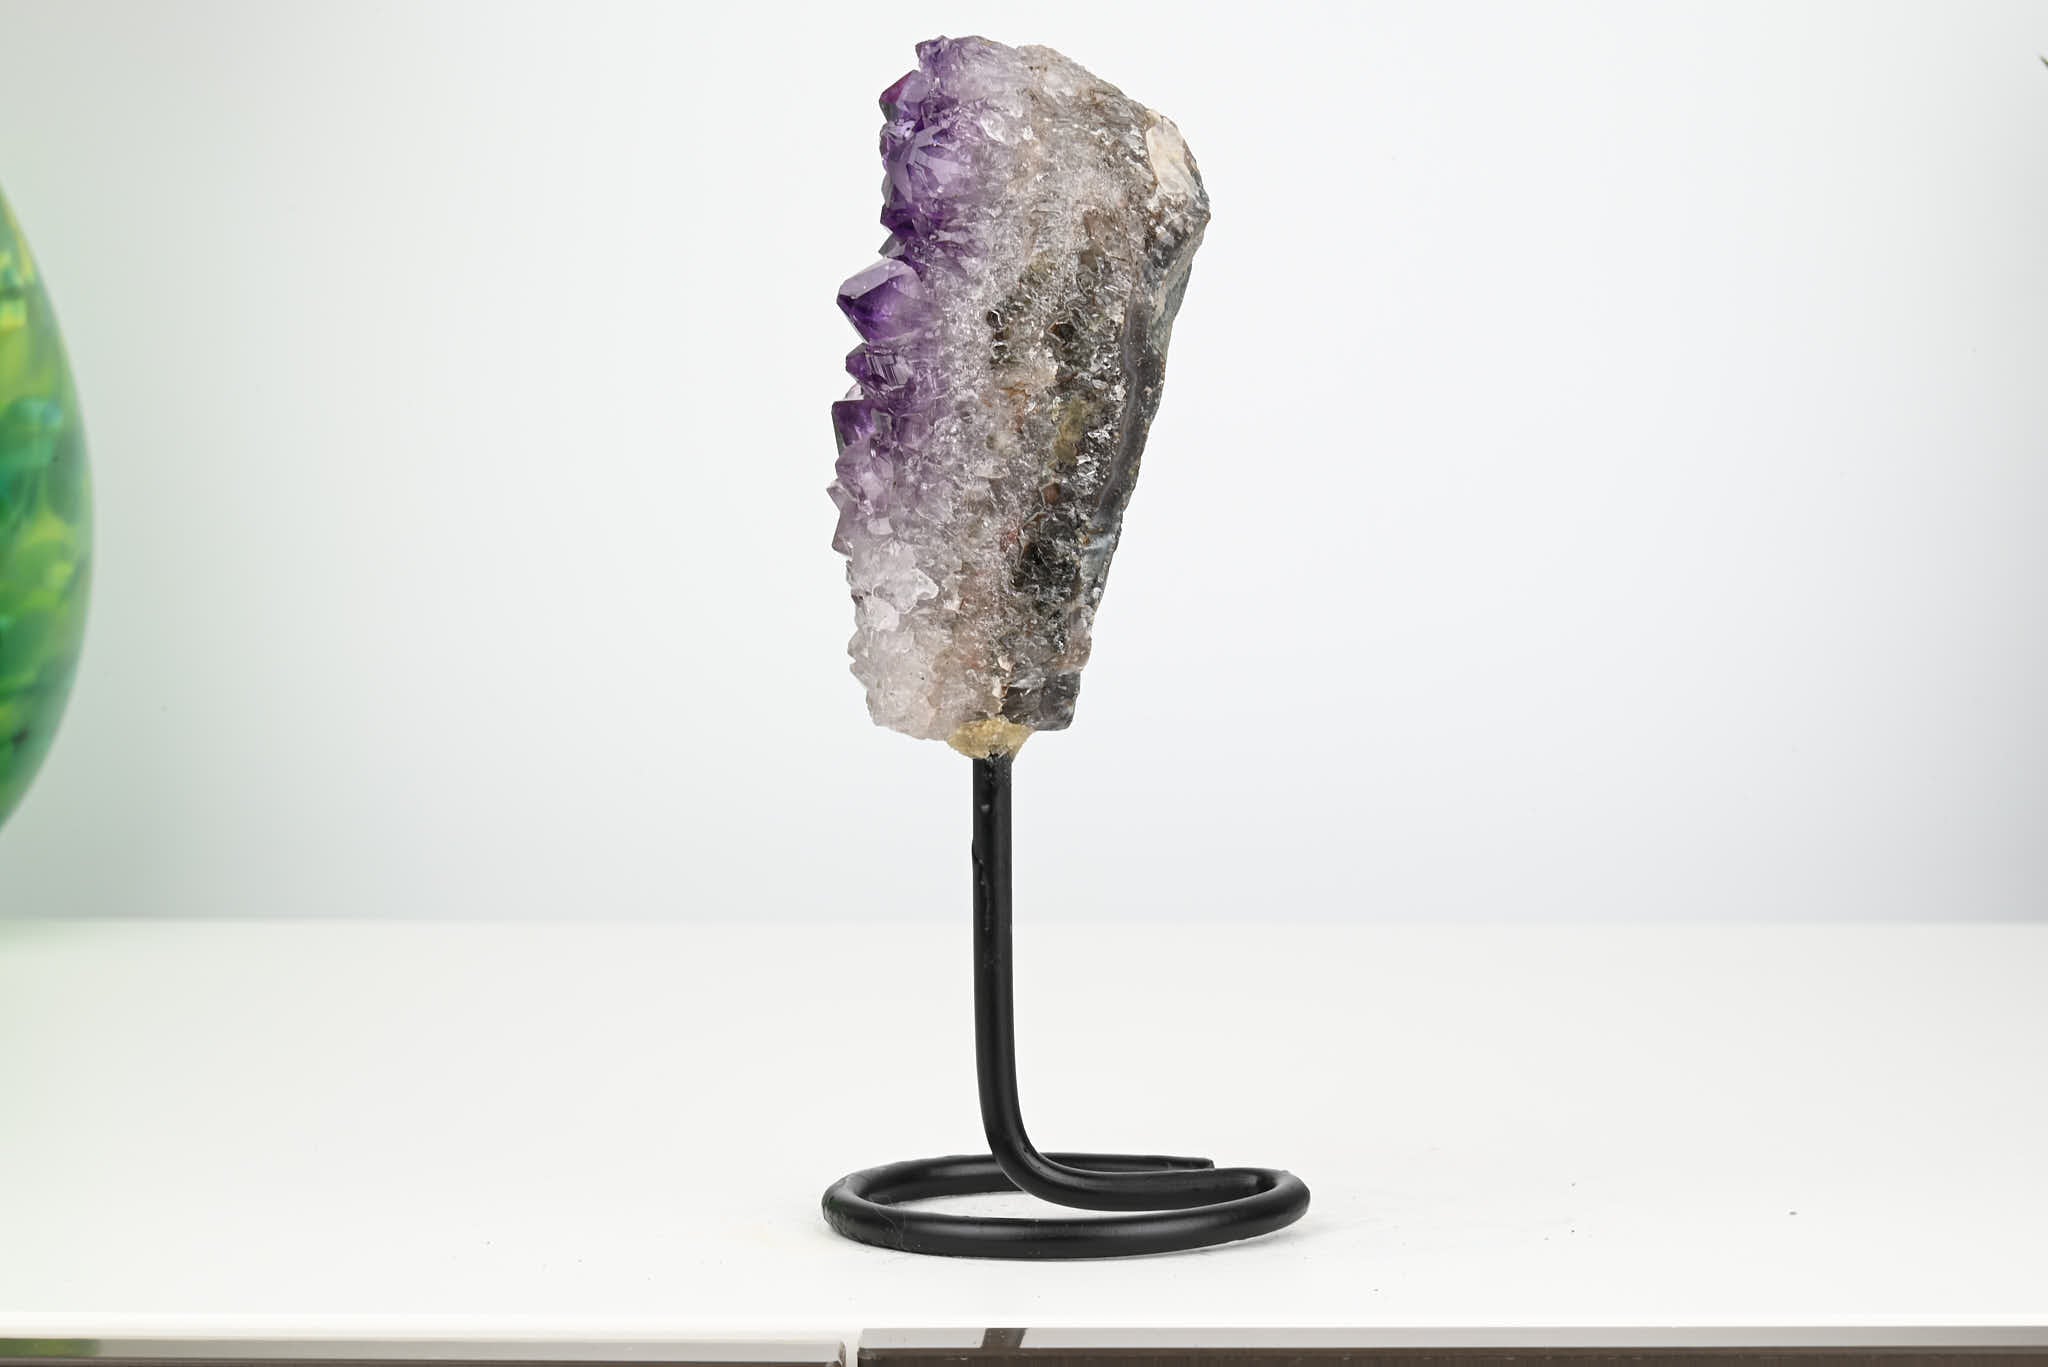 Amethyst Cluster on Stand - Small 16cm Tall - #CLUSAM-63042